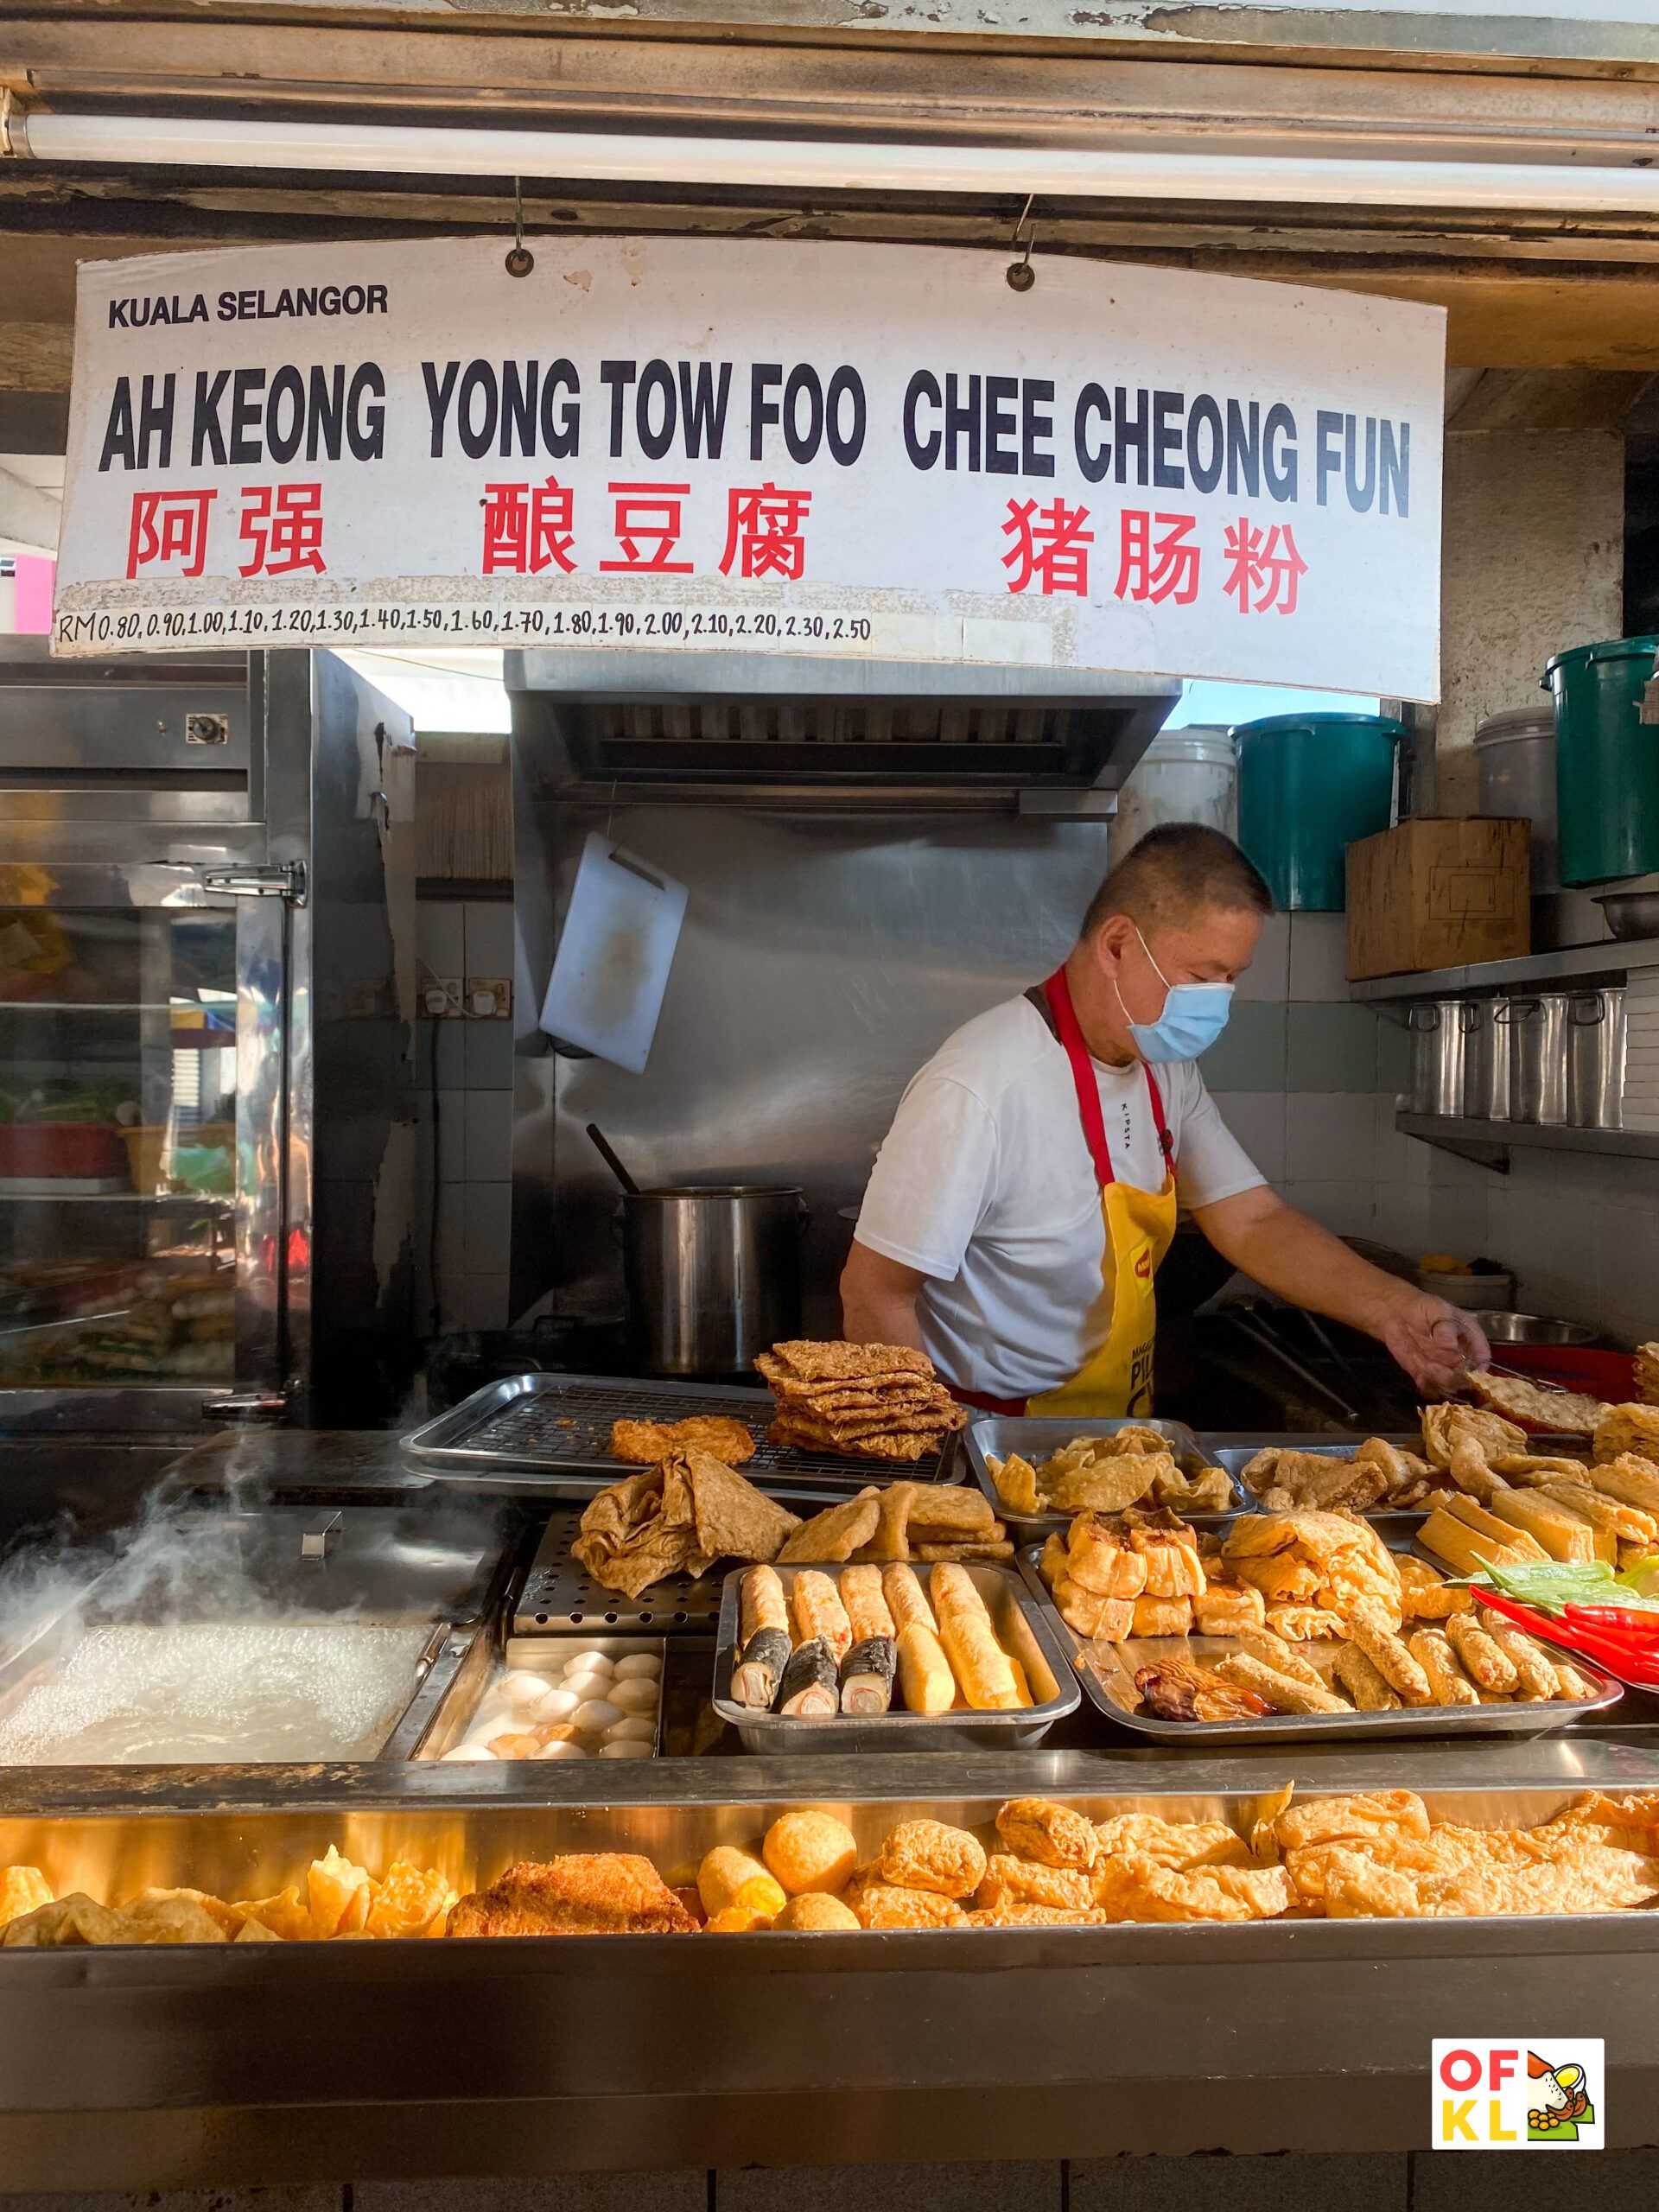 This 15-year-old stall at SS21 sells Yong Tau Foo for only RM0.80 a piece! | OnlyFoodKL